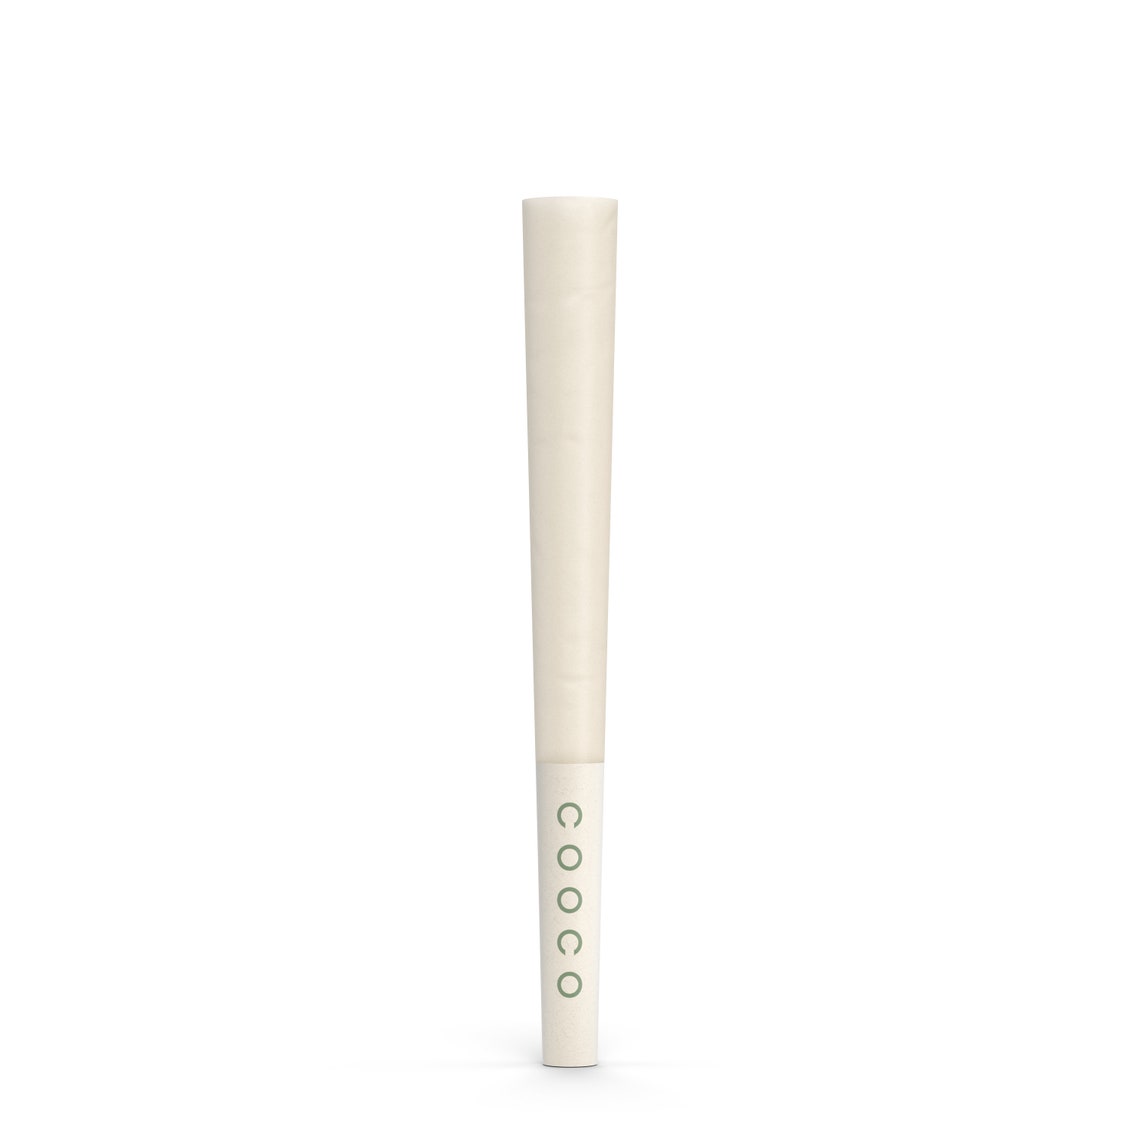 COOCO Natural Pre Roll Cones Rolling Papers, 3.38” (86mm)